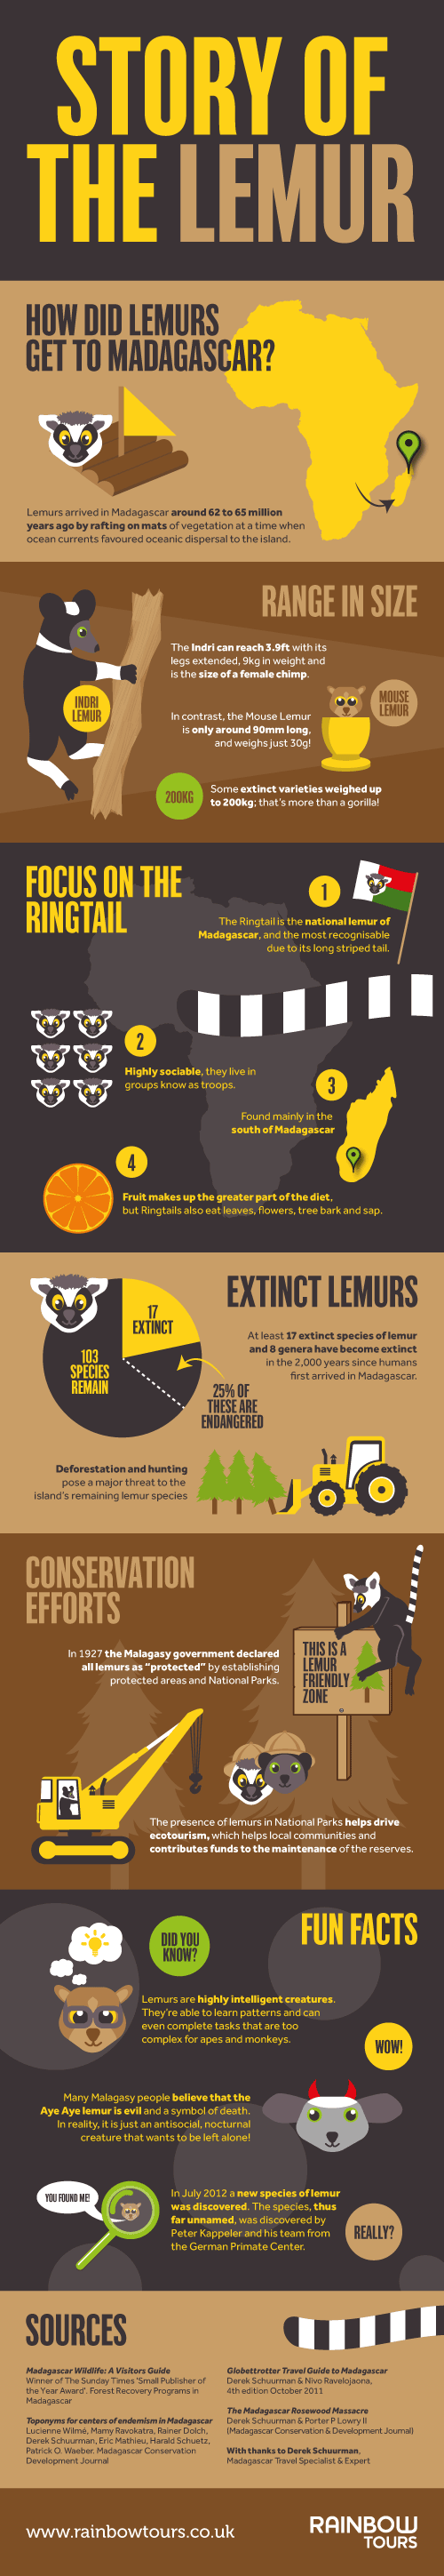 Lemur Facts Infographic – Learn about the endangered Malagasy species!